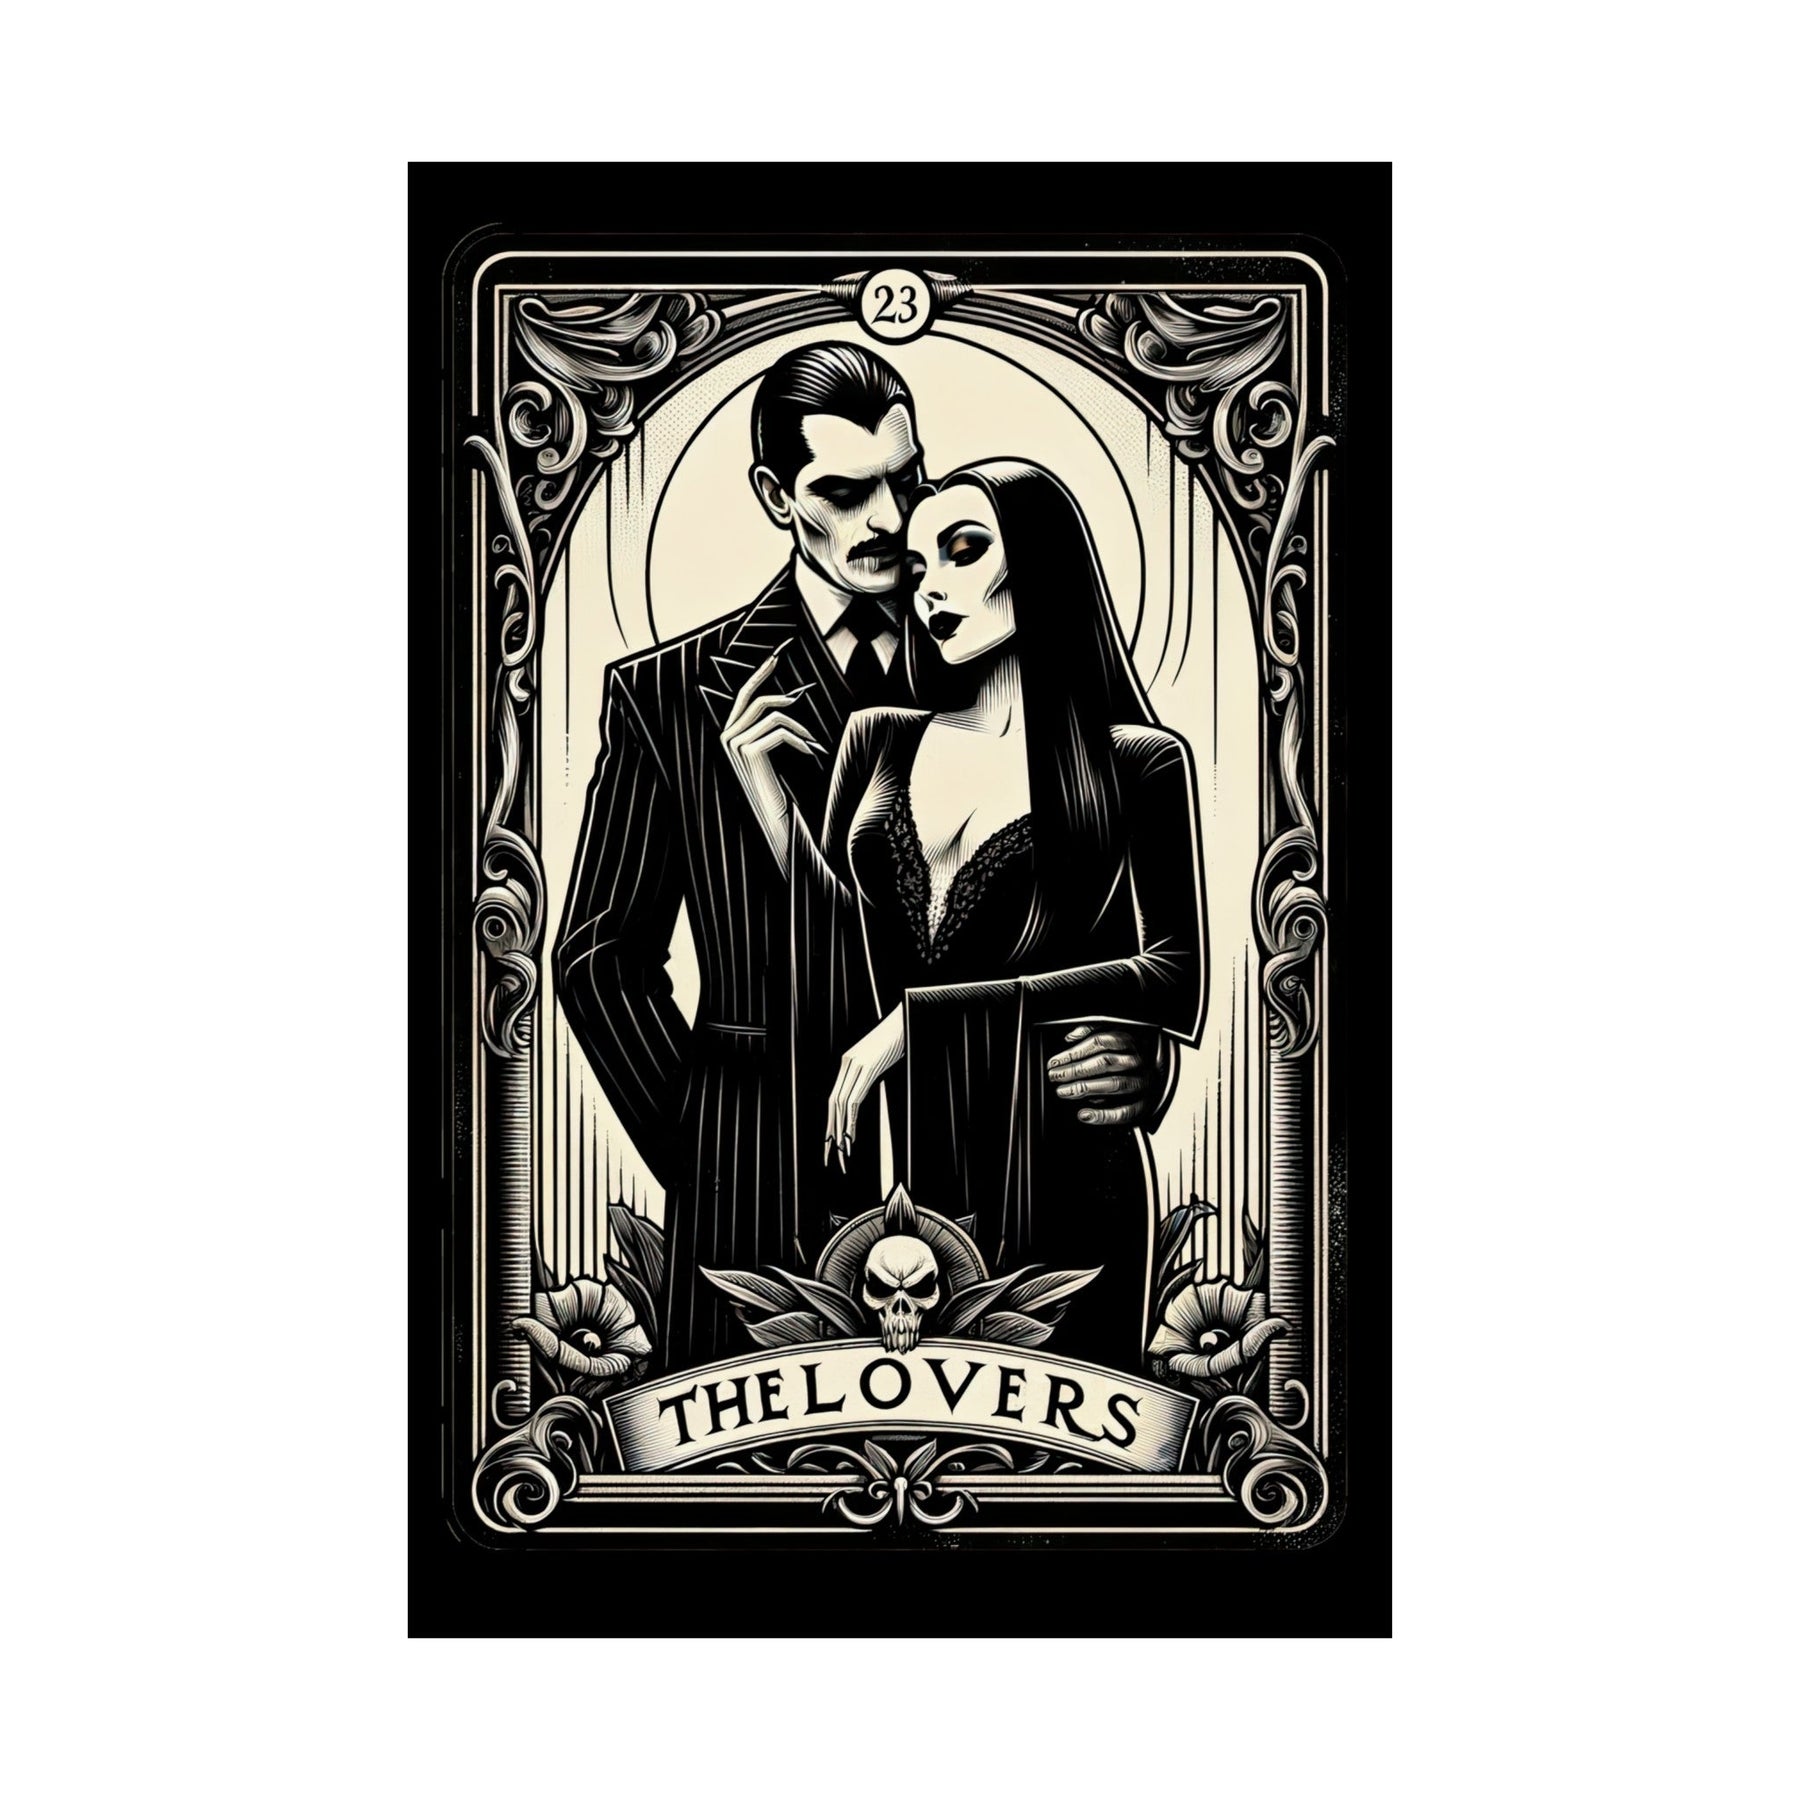 Morticia & Gomez 'The Lovers' Tarot Style Framed Poster - Goth Cloth Co.Poster10208605849313149105